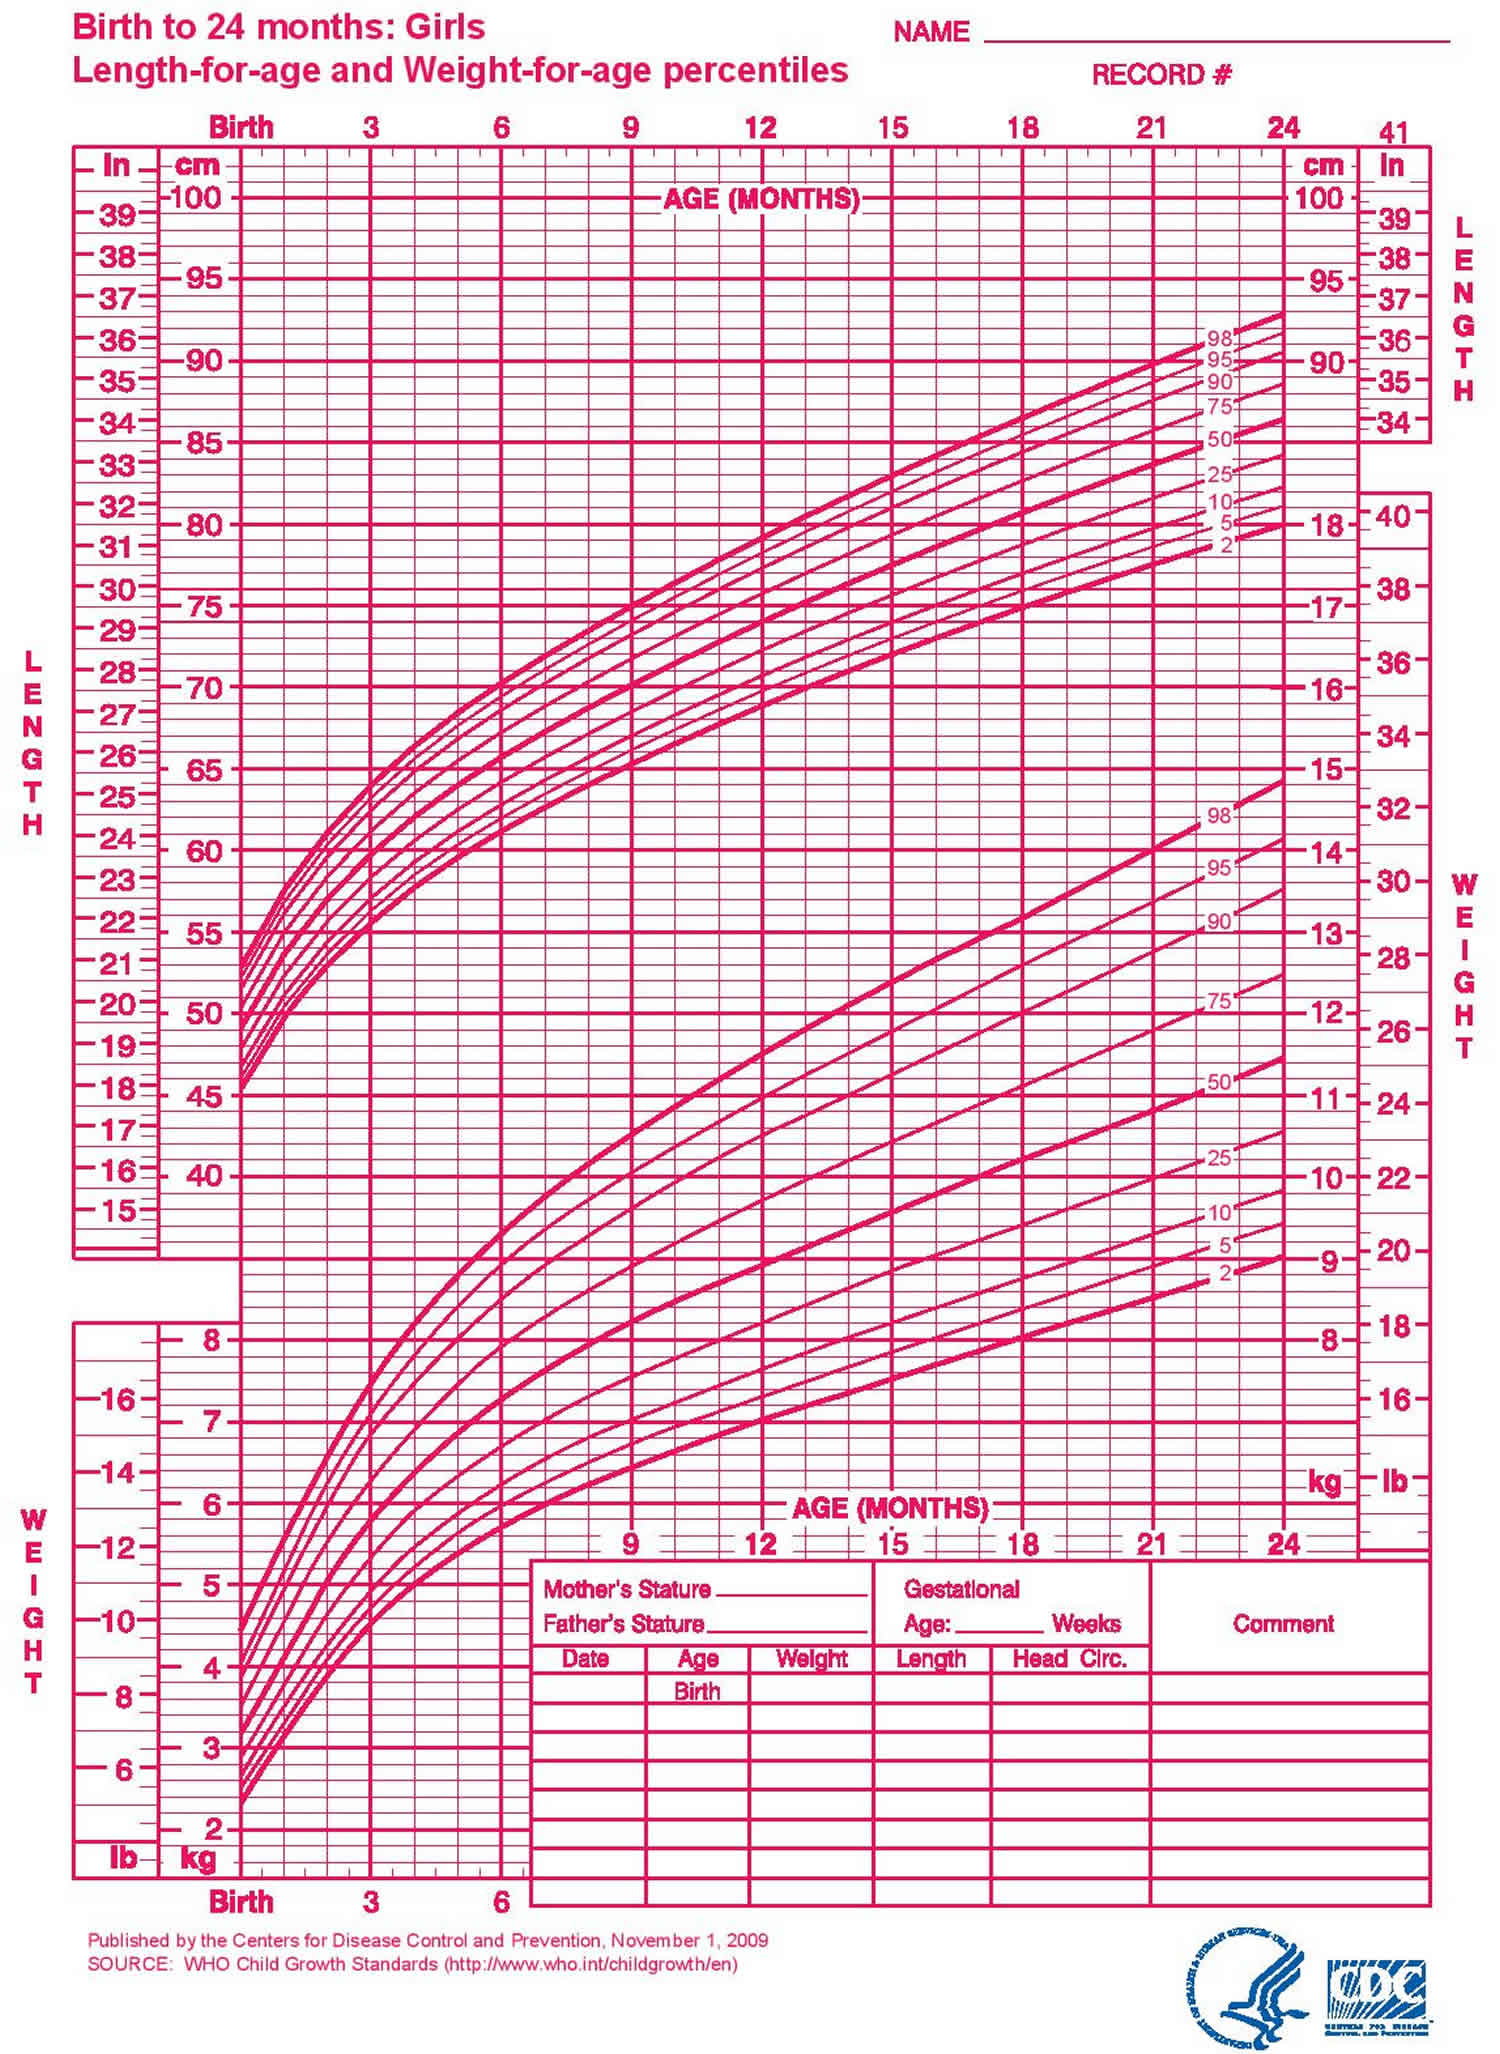 Girls-Growth-Chart-Birth-to-2-Years-Length-for-age-and-weight-for-age